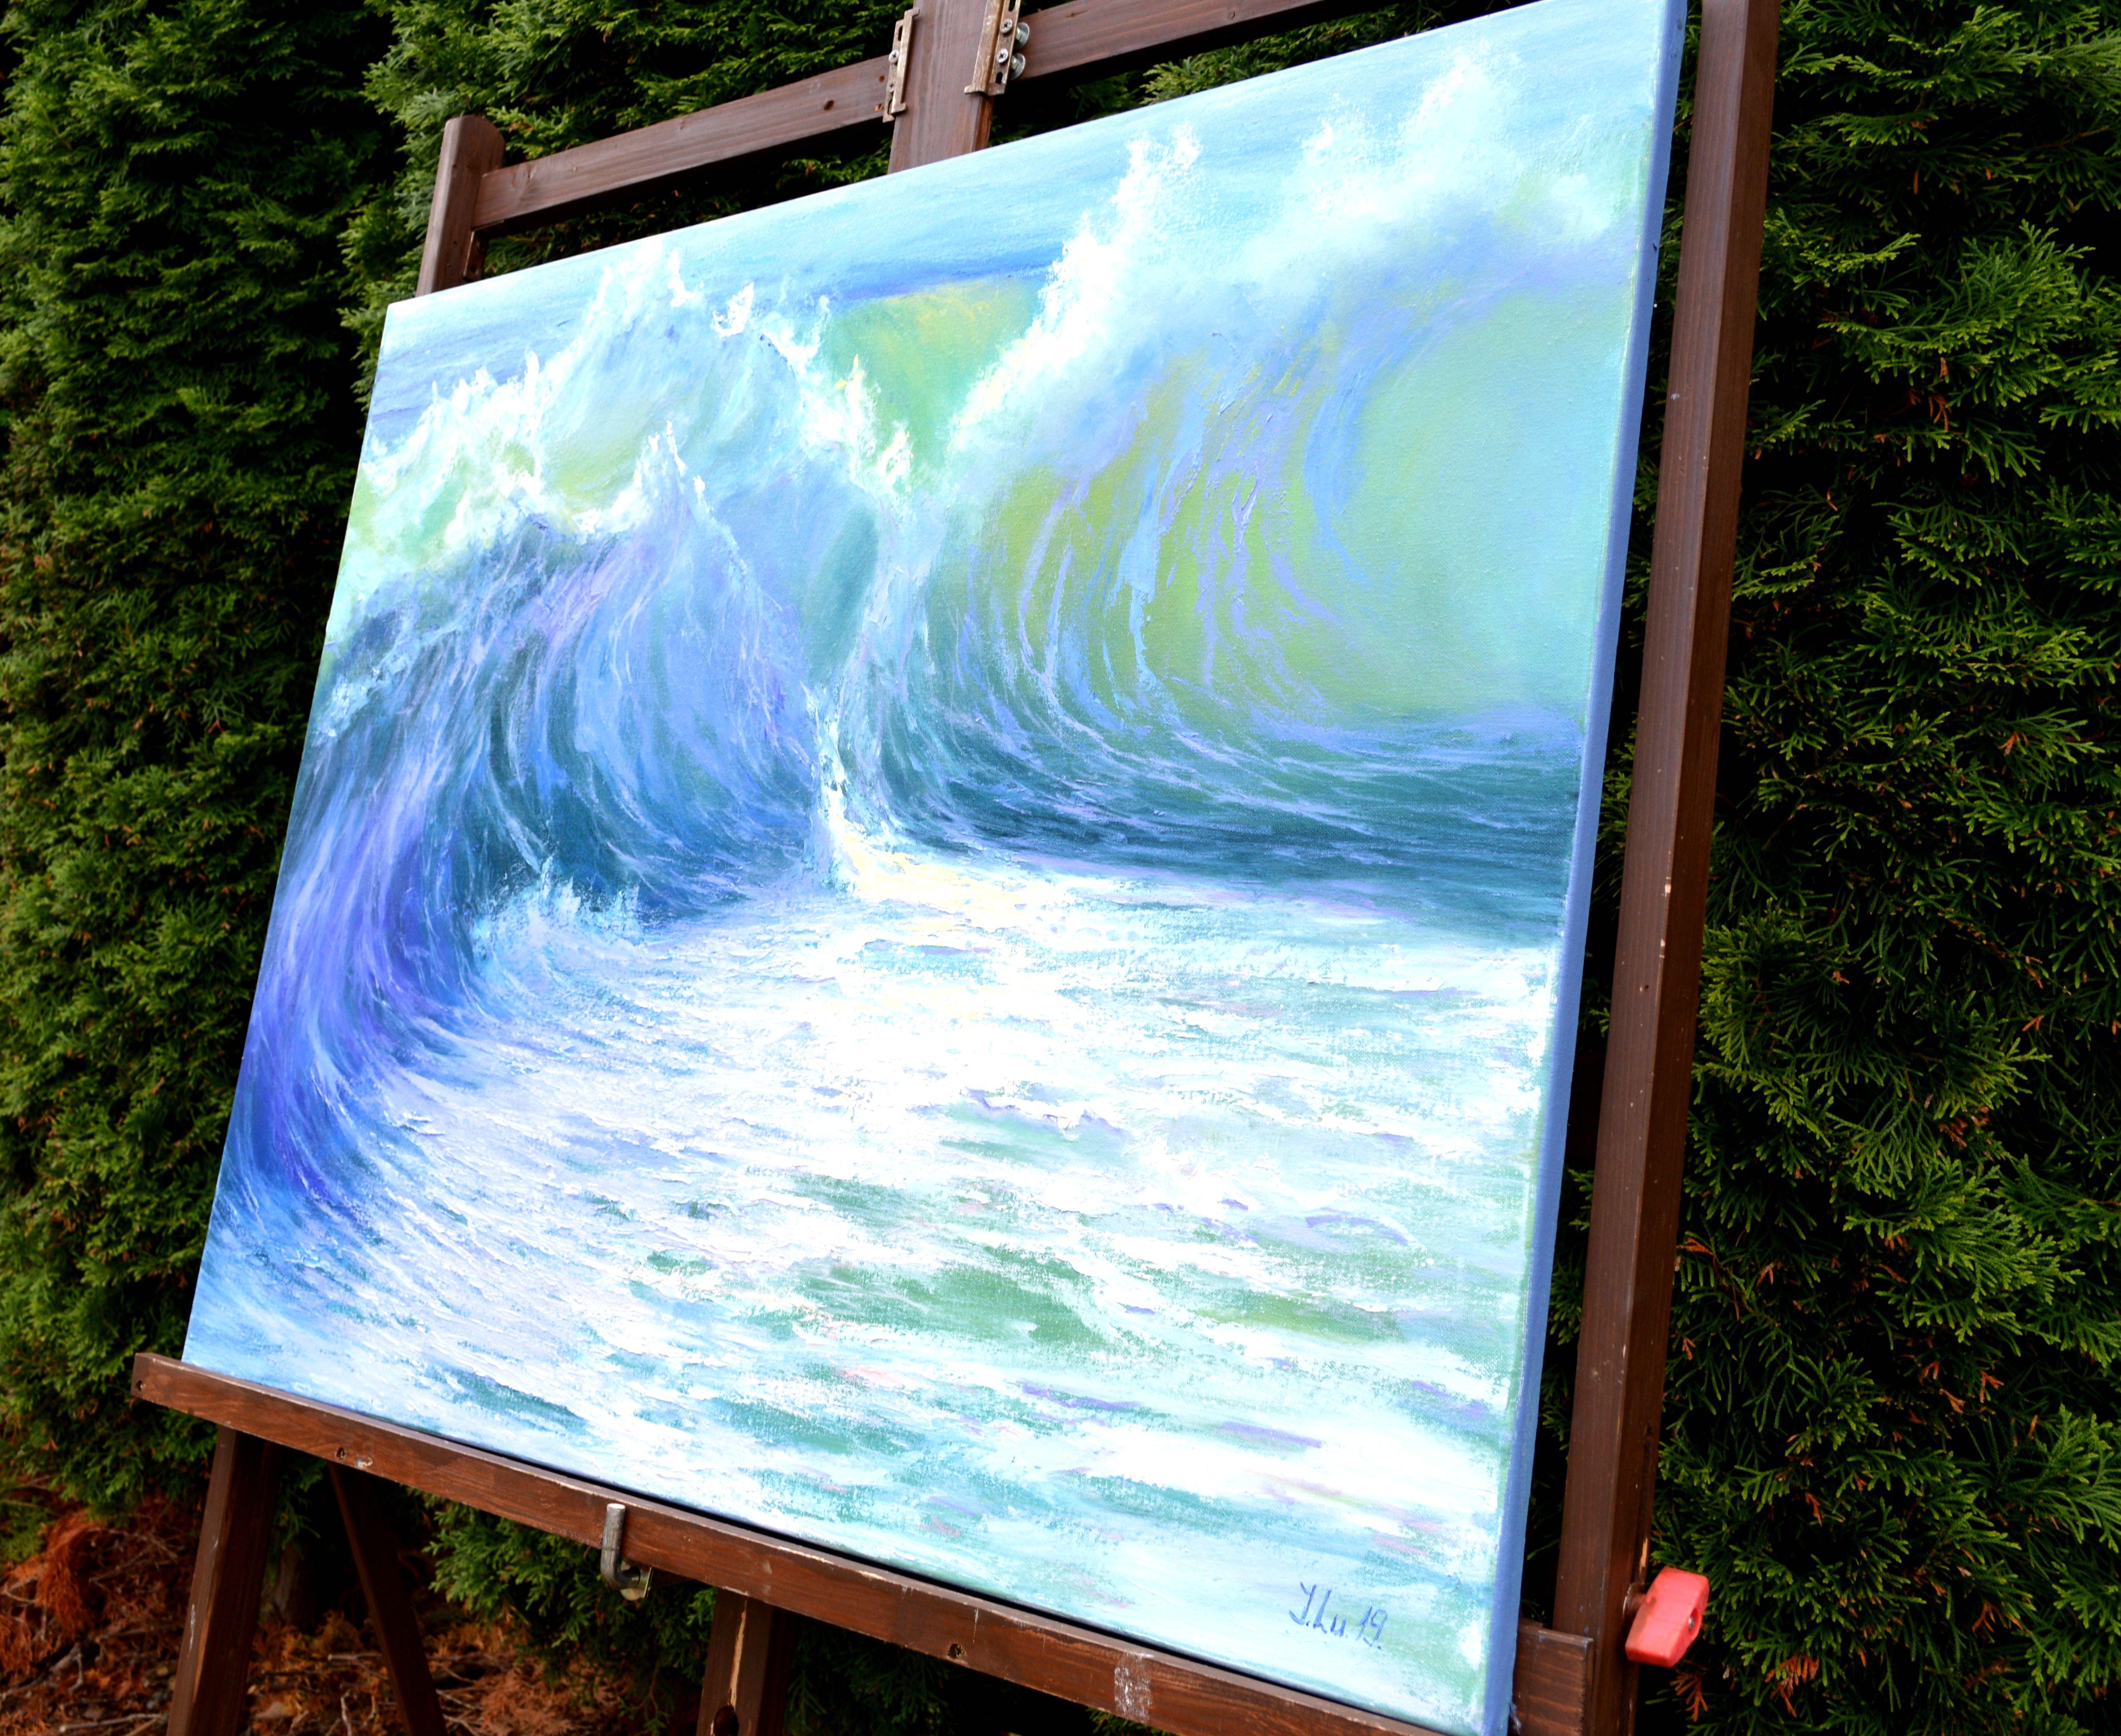 In this dynamic oil painting, I've captured the power and grace of the sea, blending impressionism with touches of realism to evoke the raw beauty of nature. The vibrant hues and expressive brushstrokes embody the ocean's spirit, inviting viewers to